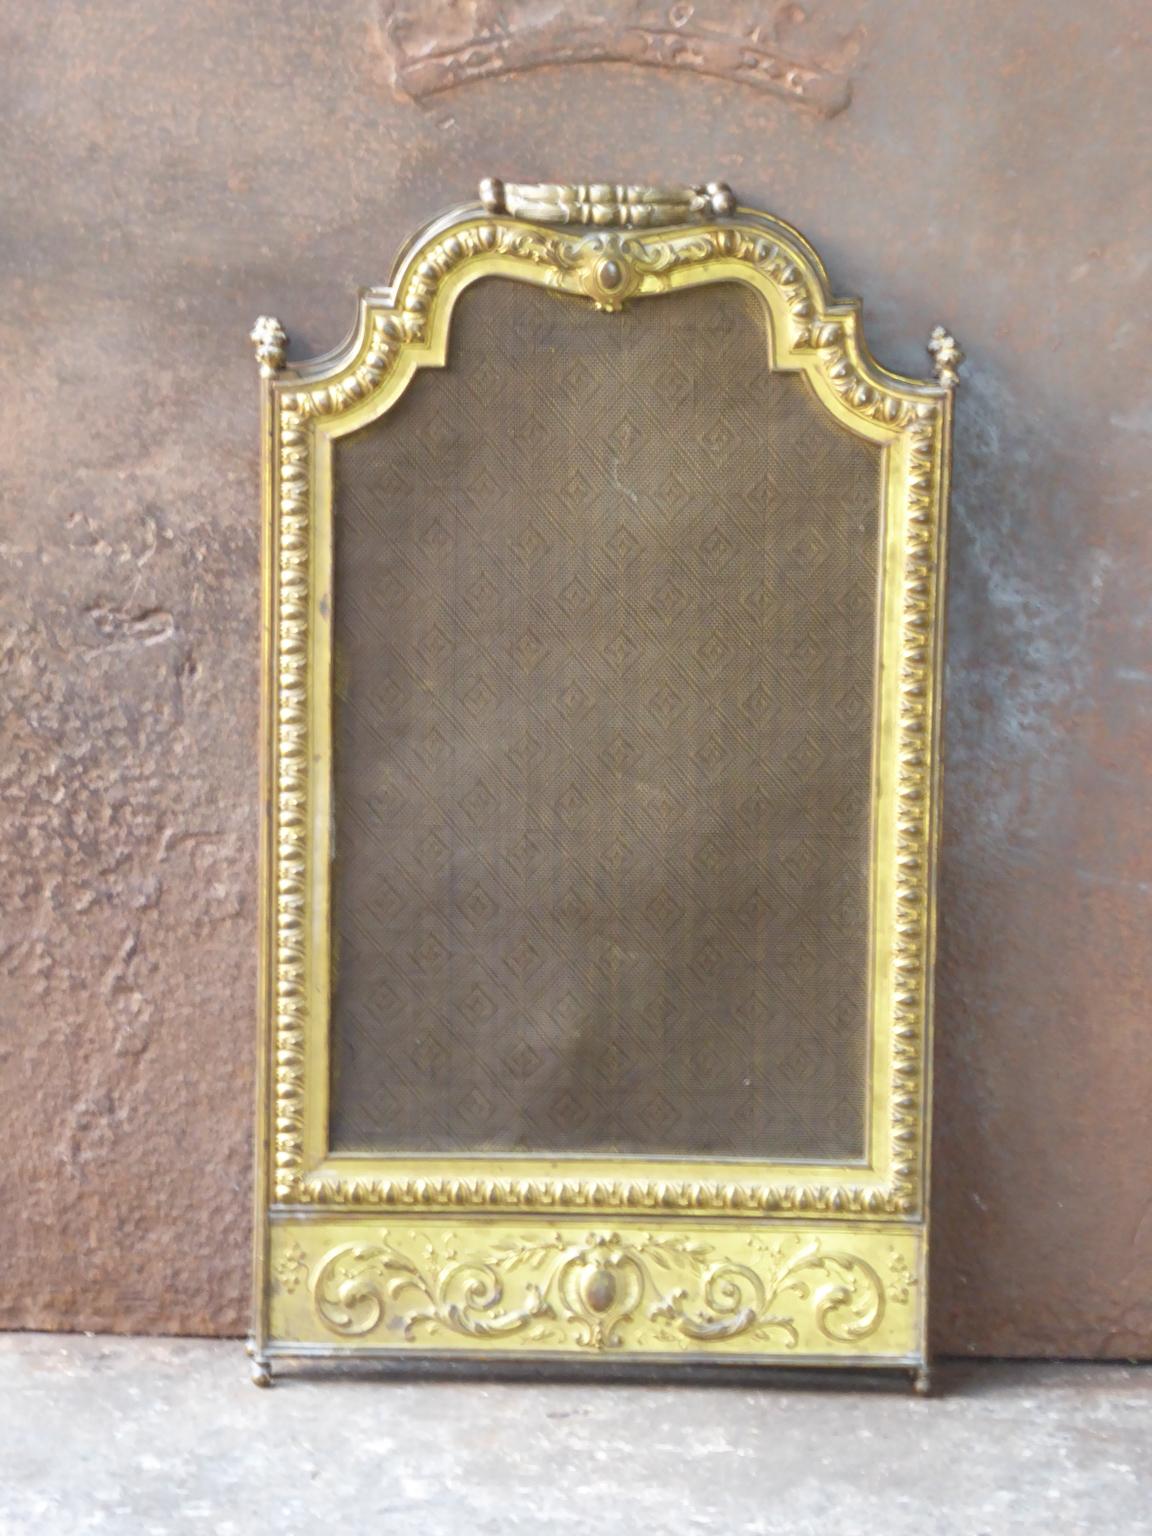 Brass Antique French Napoleon III Fireplace Screen or Fire Screen, 19th Century